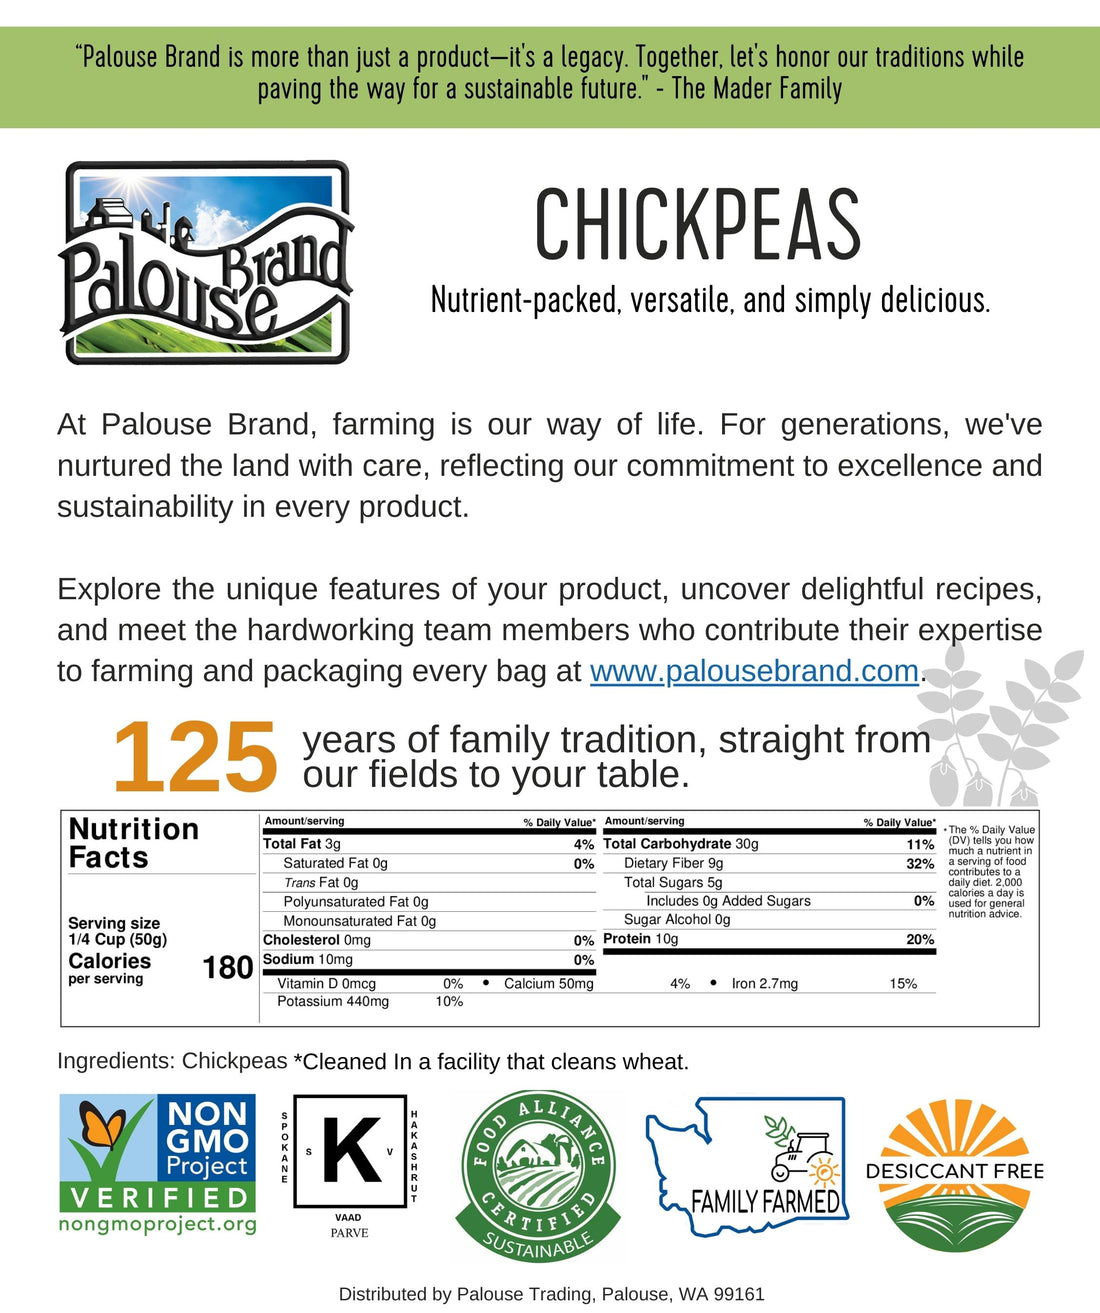 Nutrition Facts for Washington State Grown Chickpeas/Garbanzo Beans